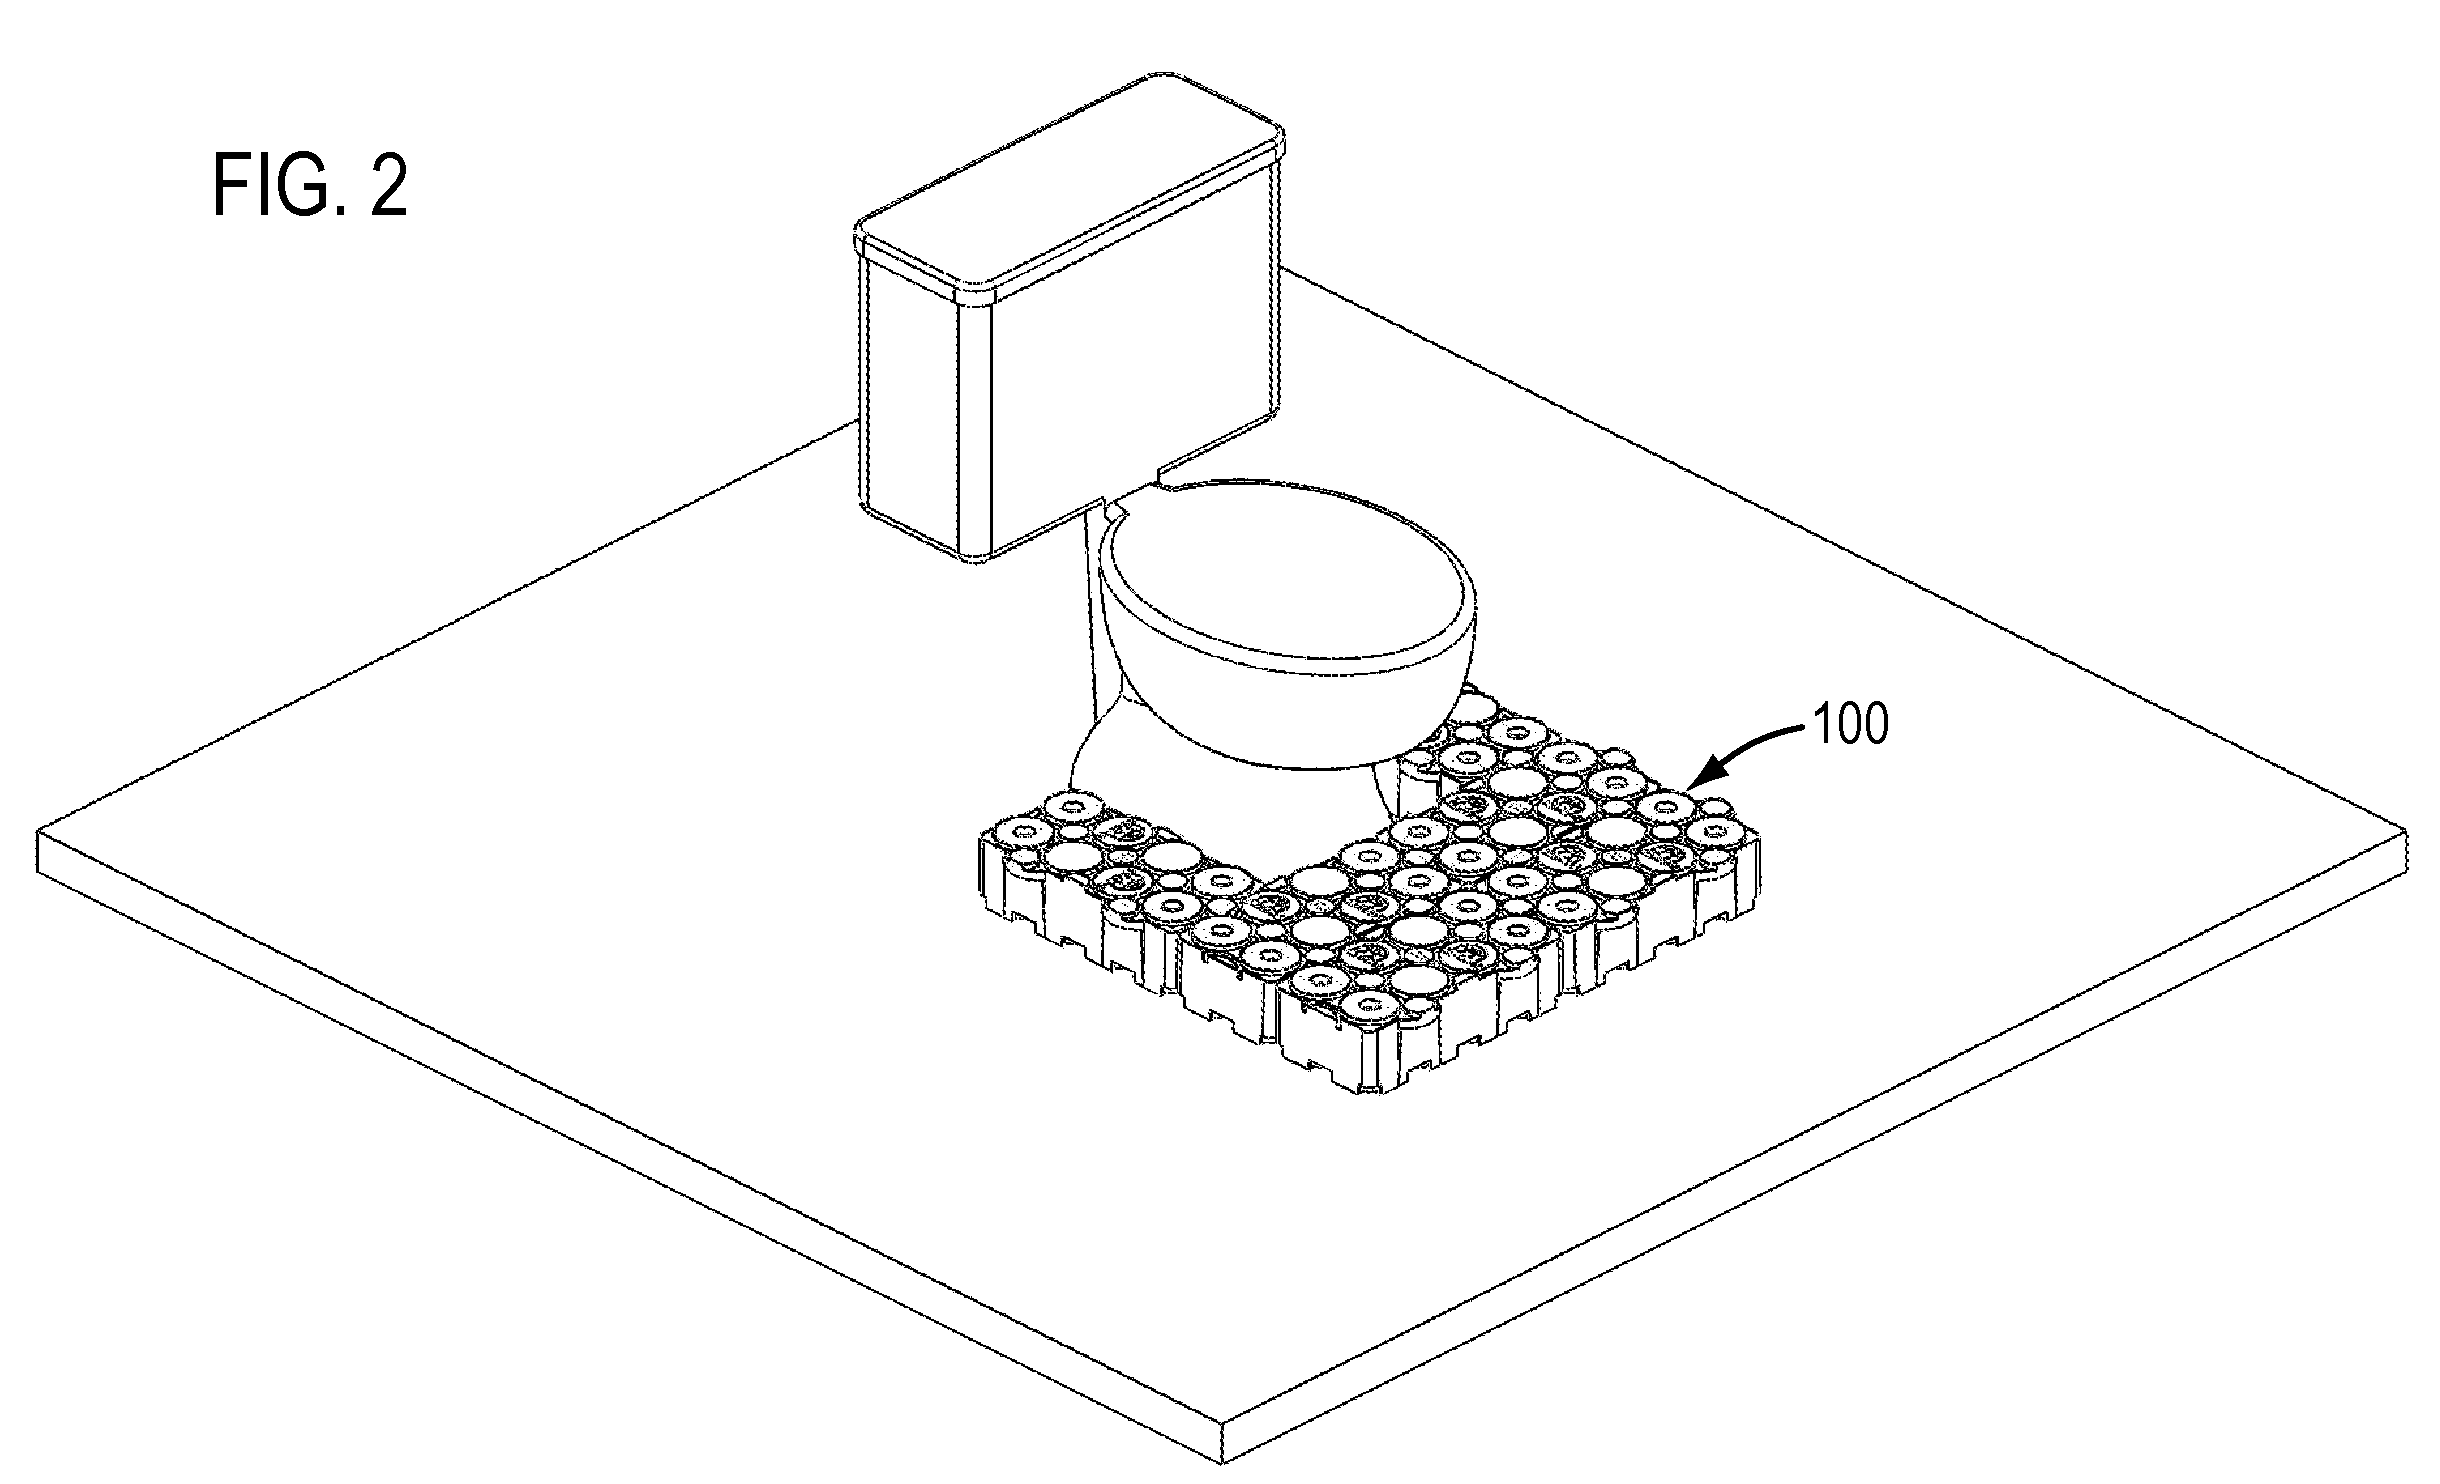 System and method for a modular step stool